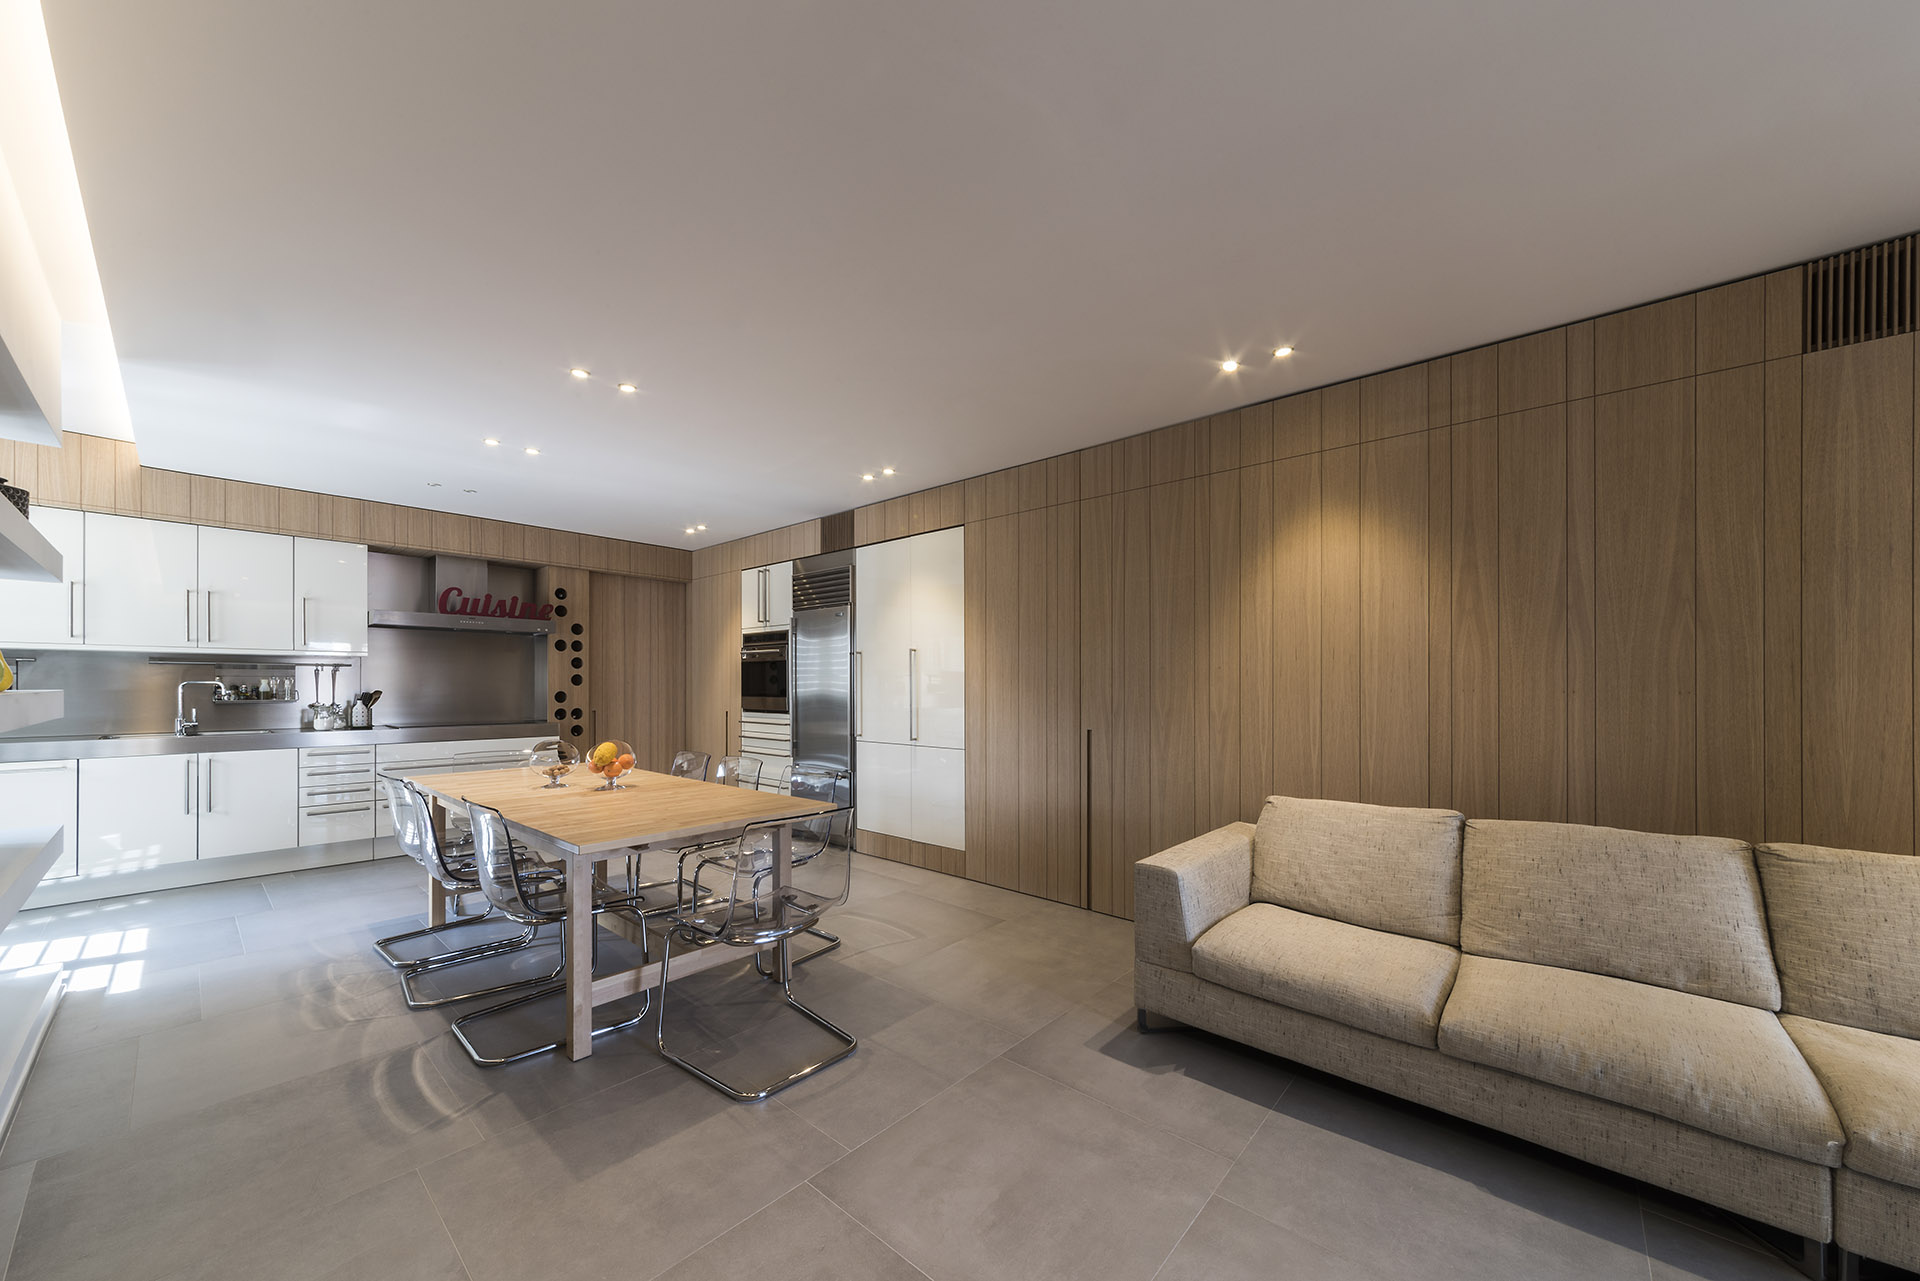 Bespoke paneling and optimized spaces: Contaminations, fine renovation of a family apartment in Bari, Italy